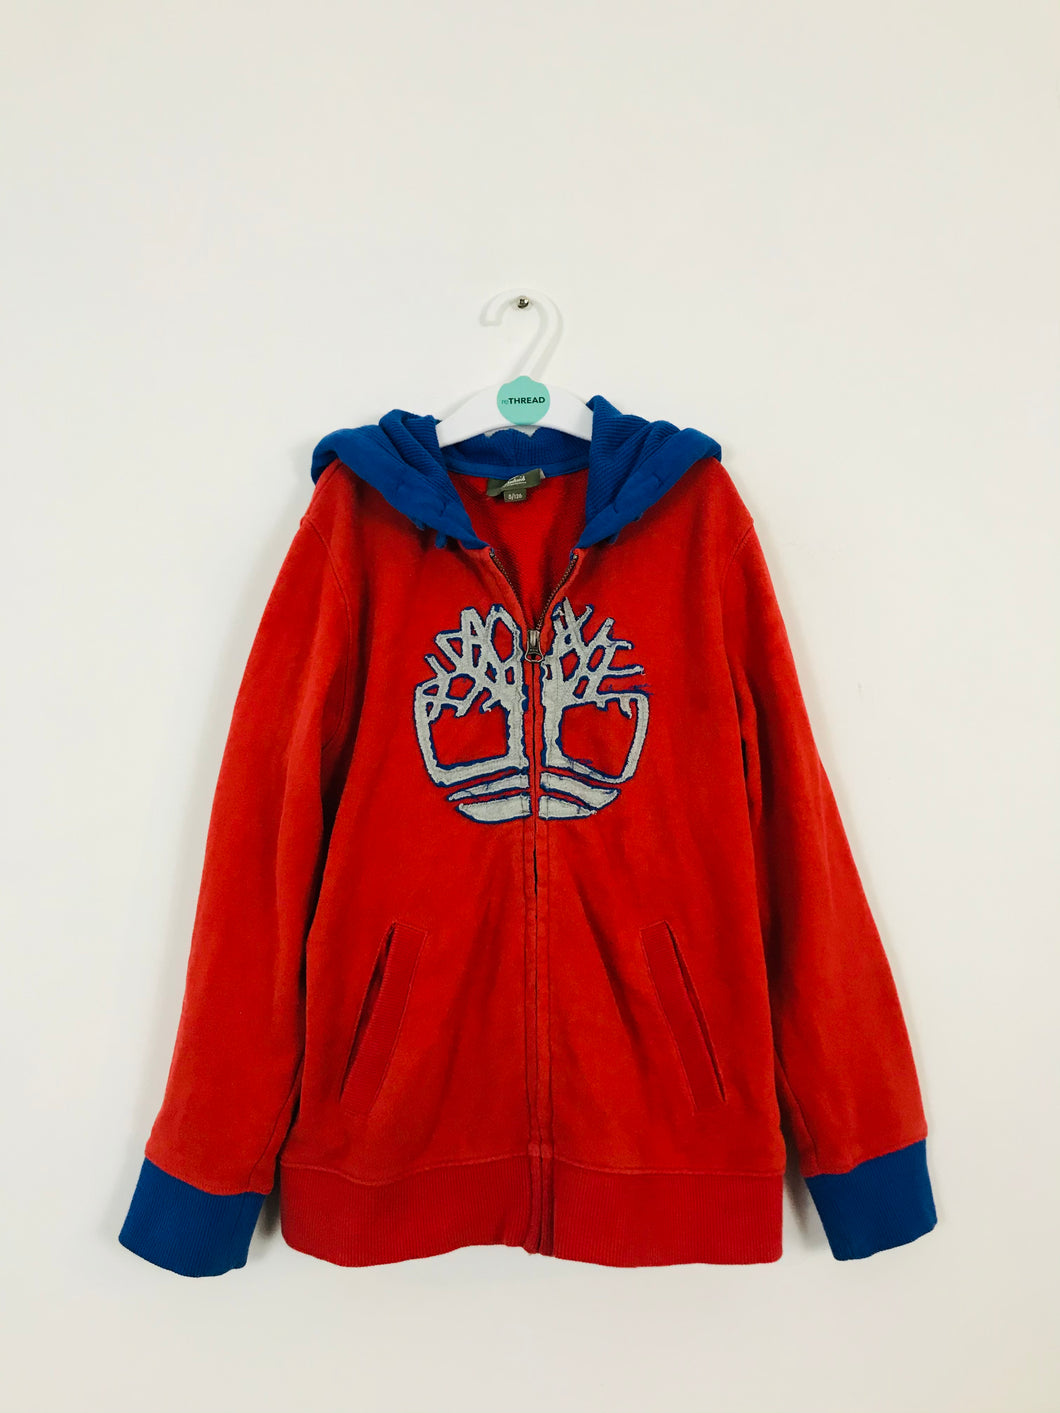 Timberland Kids Hoodie | Age 8 | Red and Blue